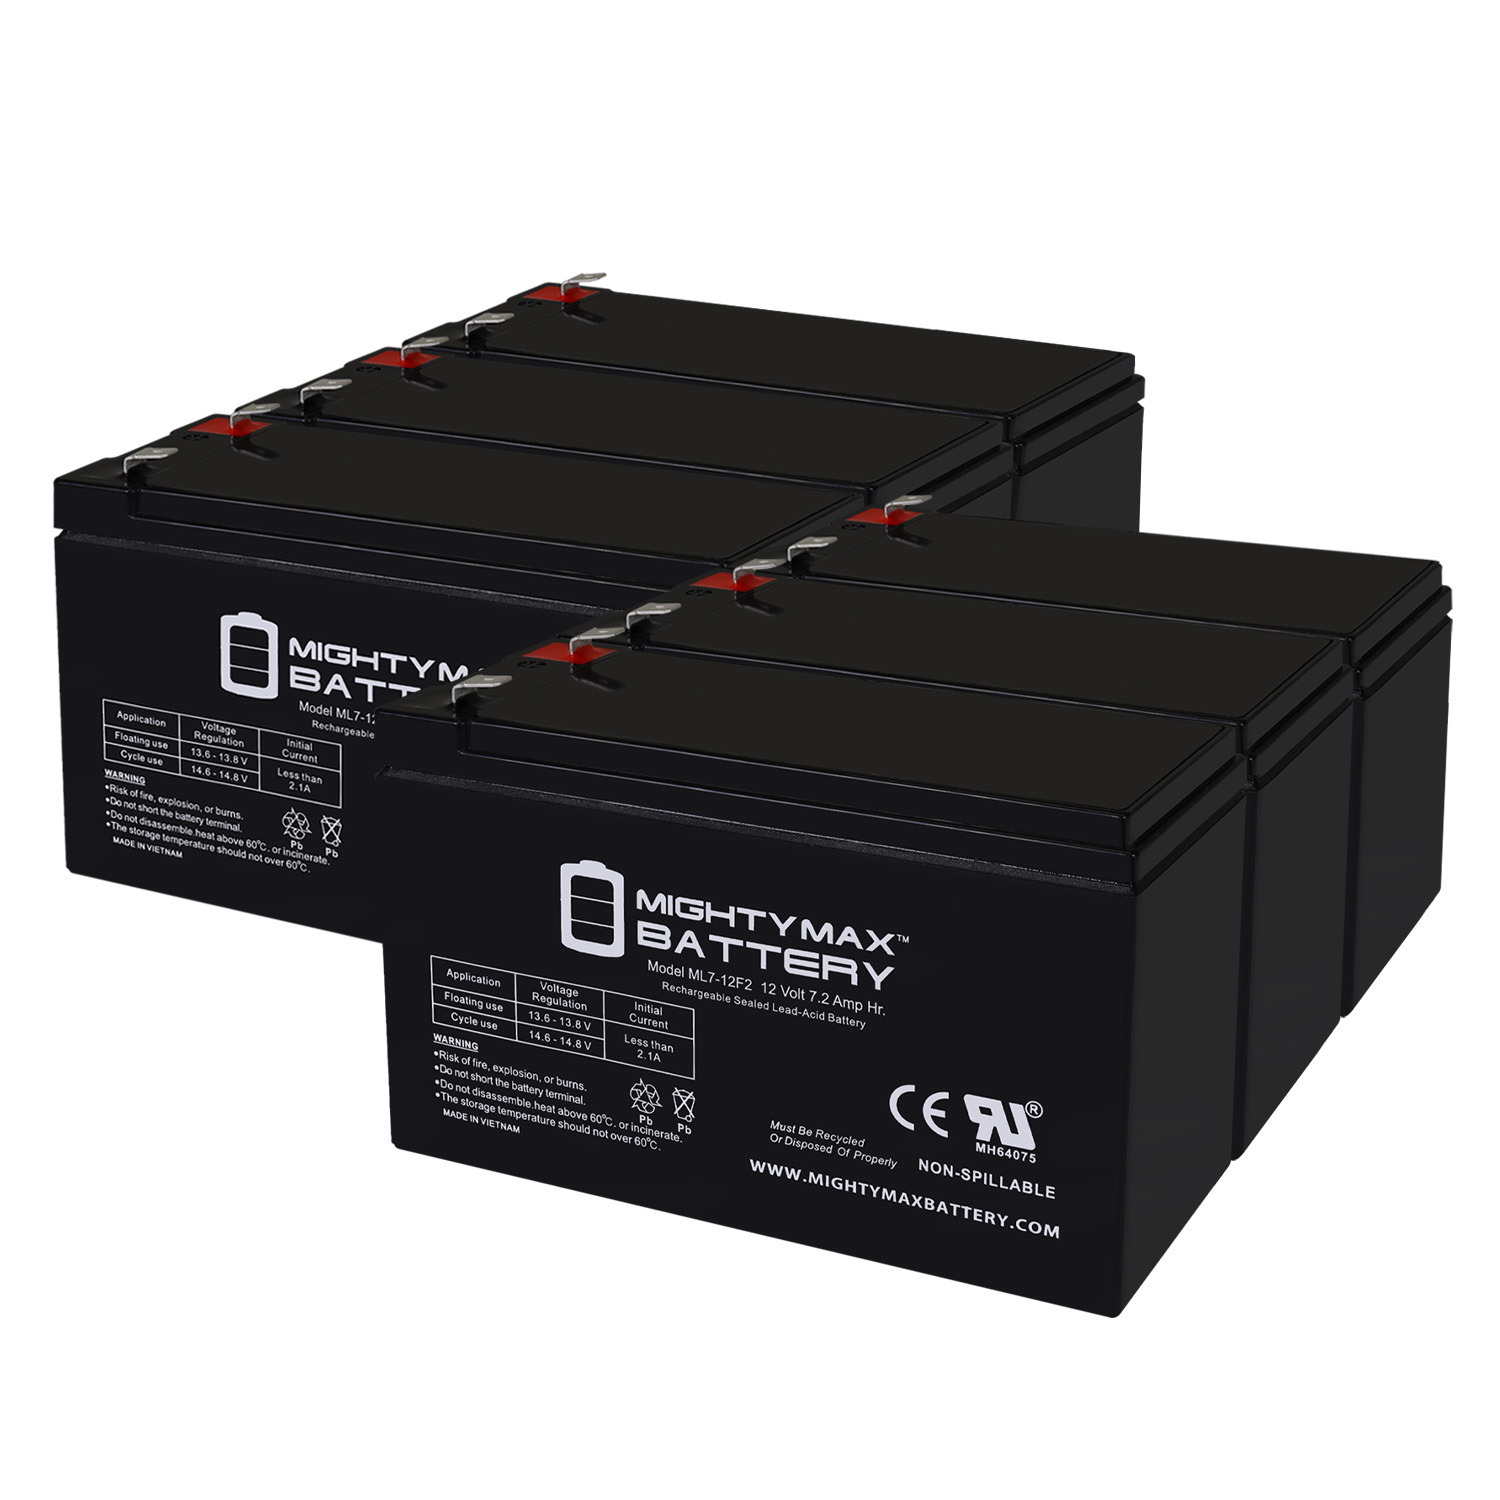 12V 7Ah F2 Replacement Battery for Kaylee Lotus Exige S KL-7011 - 6 Pack